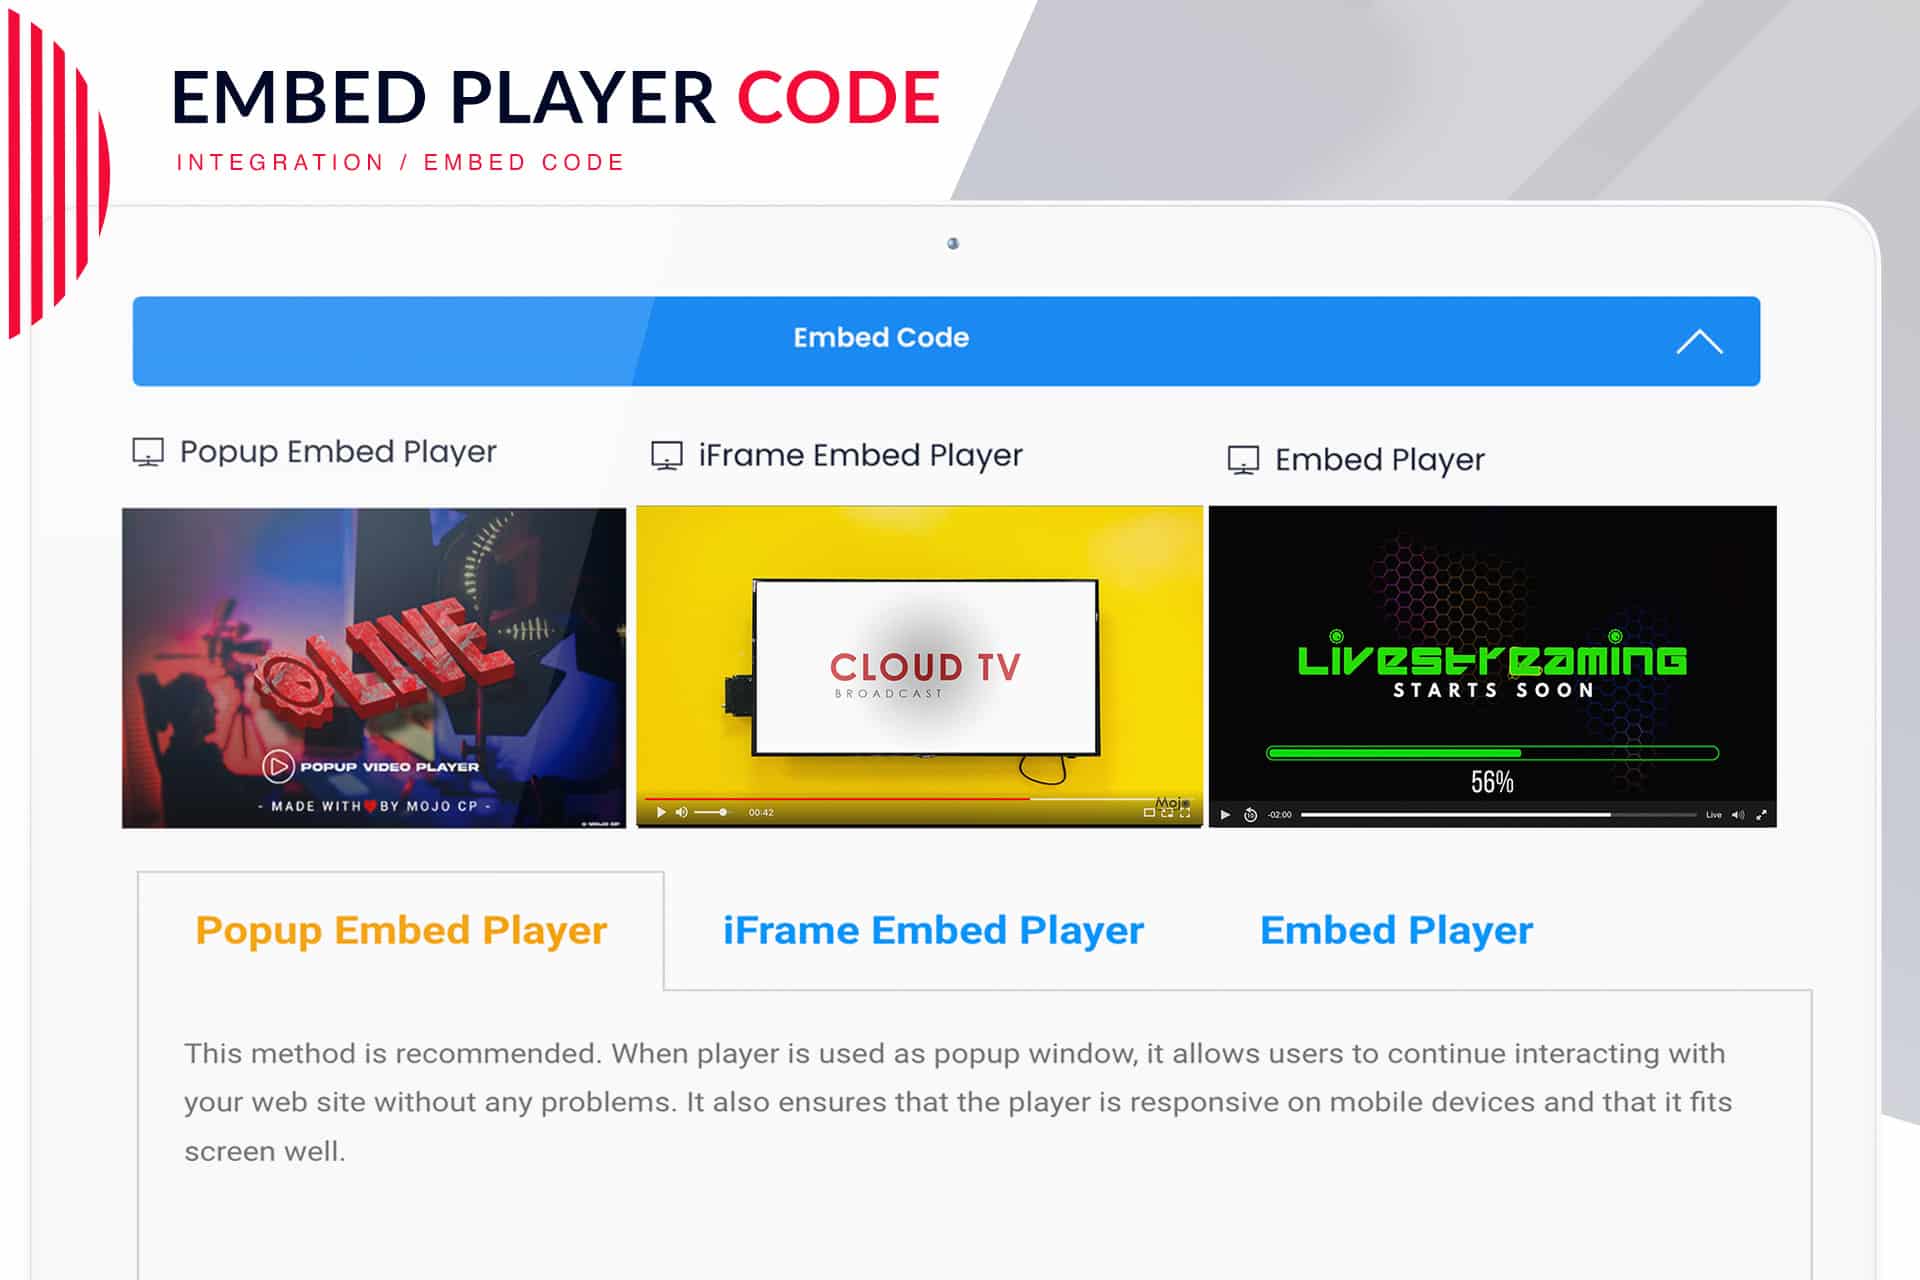 Embed Player Code